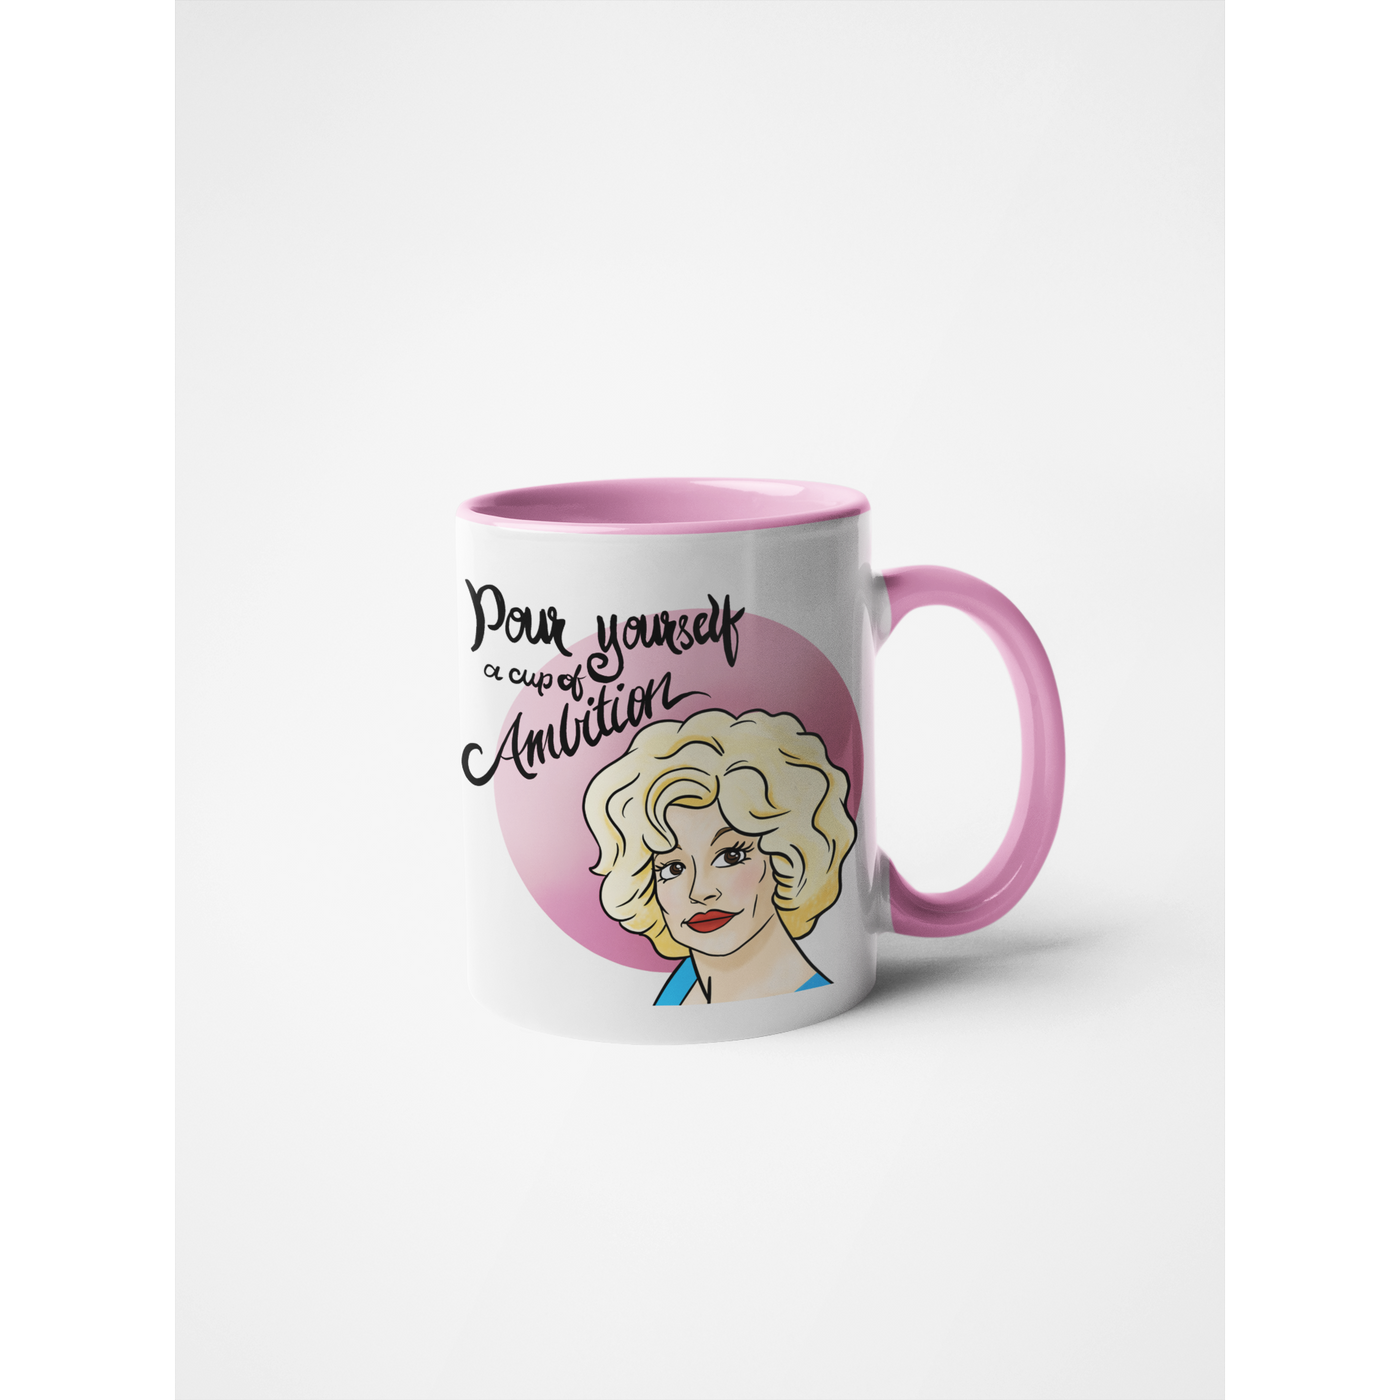 Dolly Parton Pour Yourself A Cup Of Ambition Mug 15 oz.